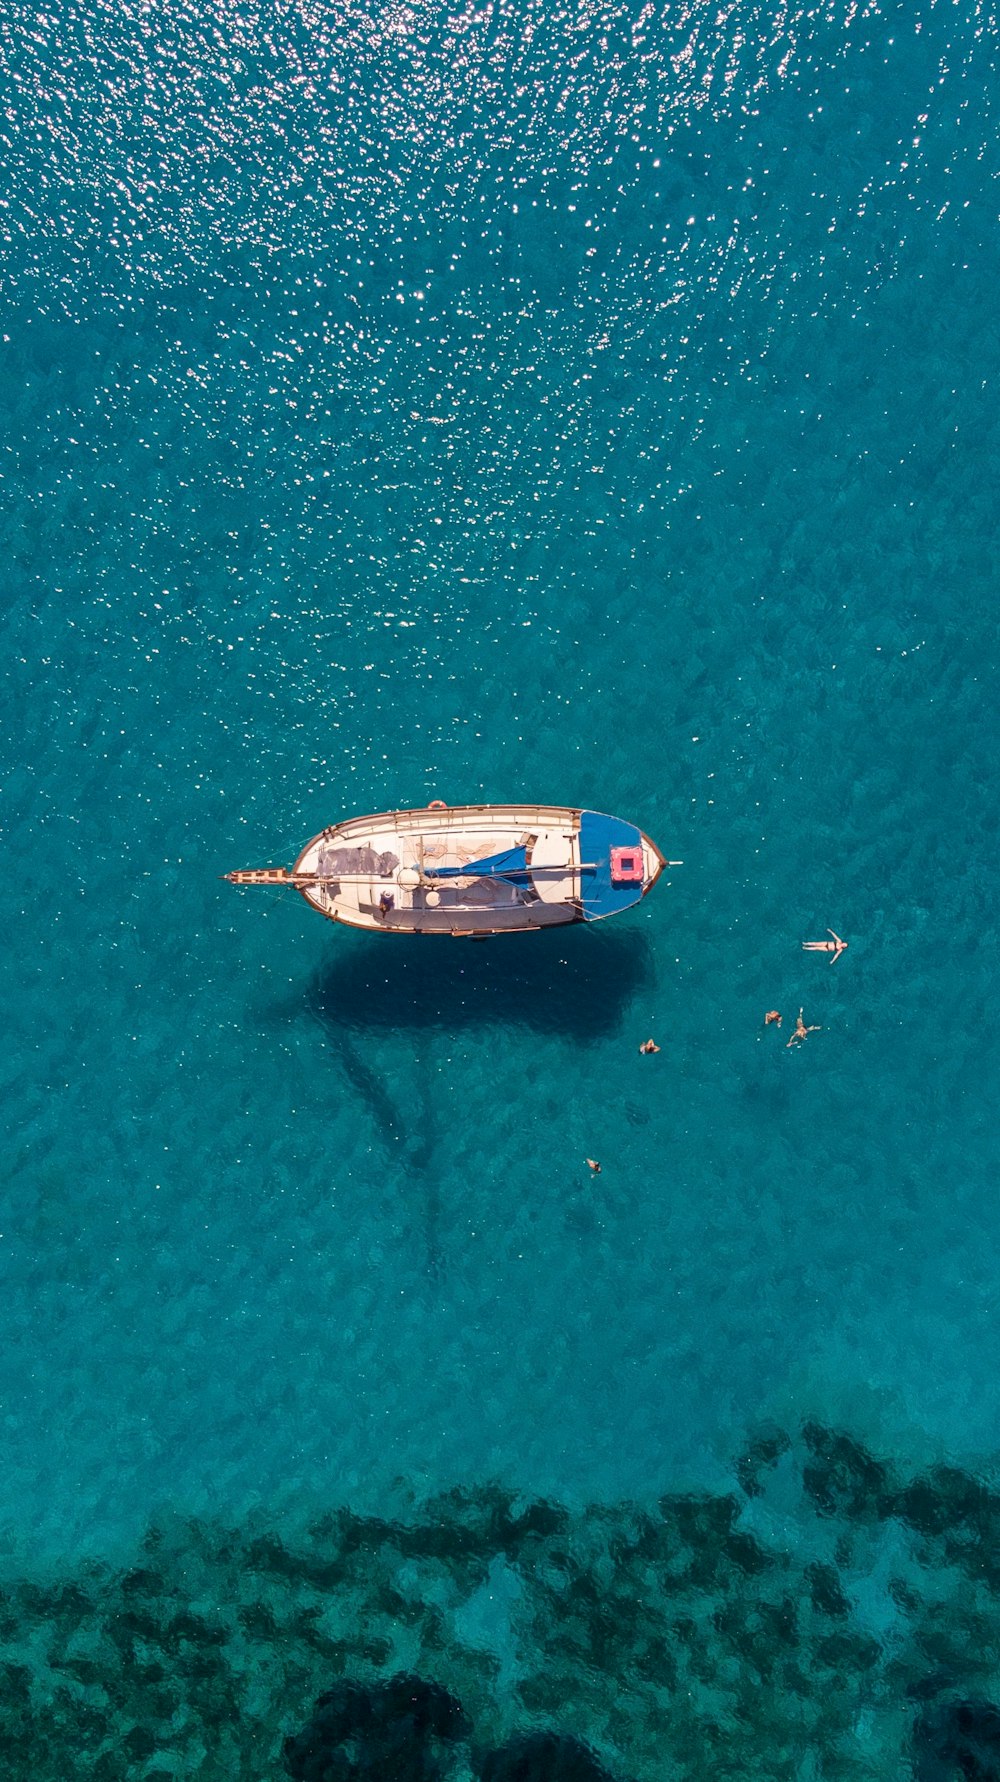 blue and white sailboat on body of water